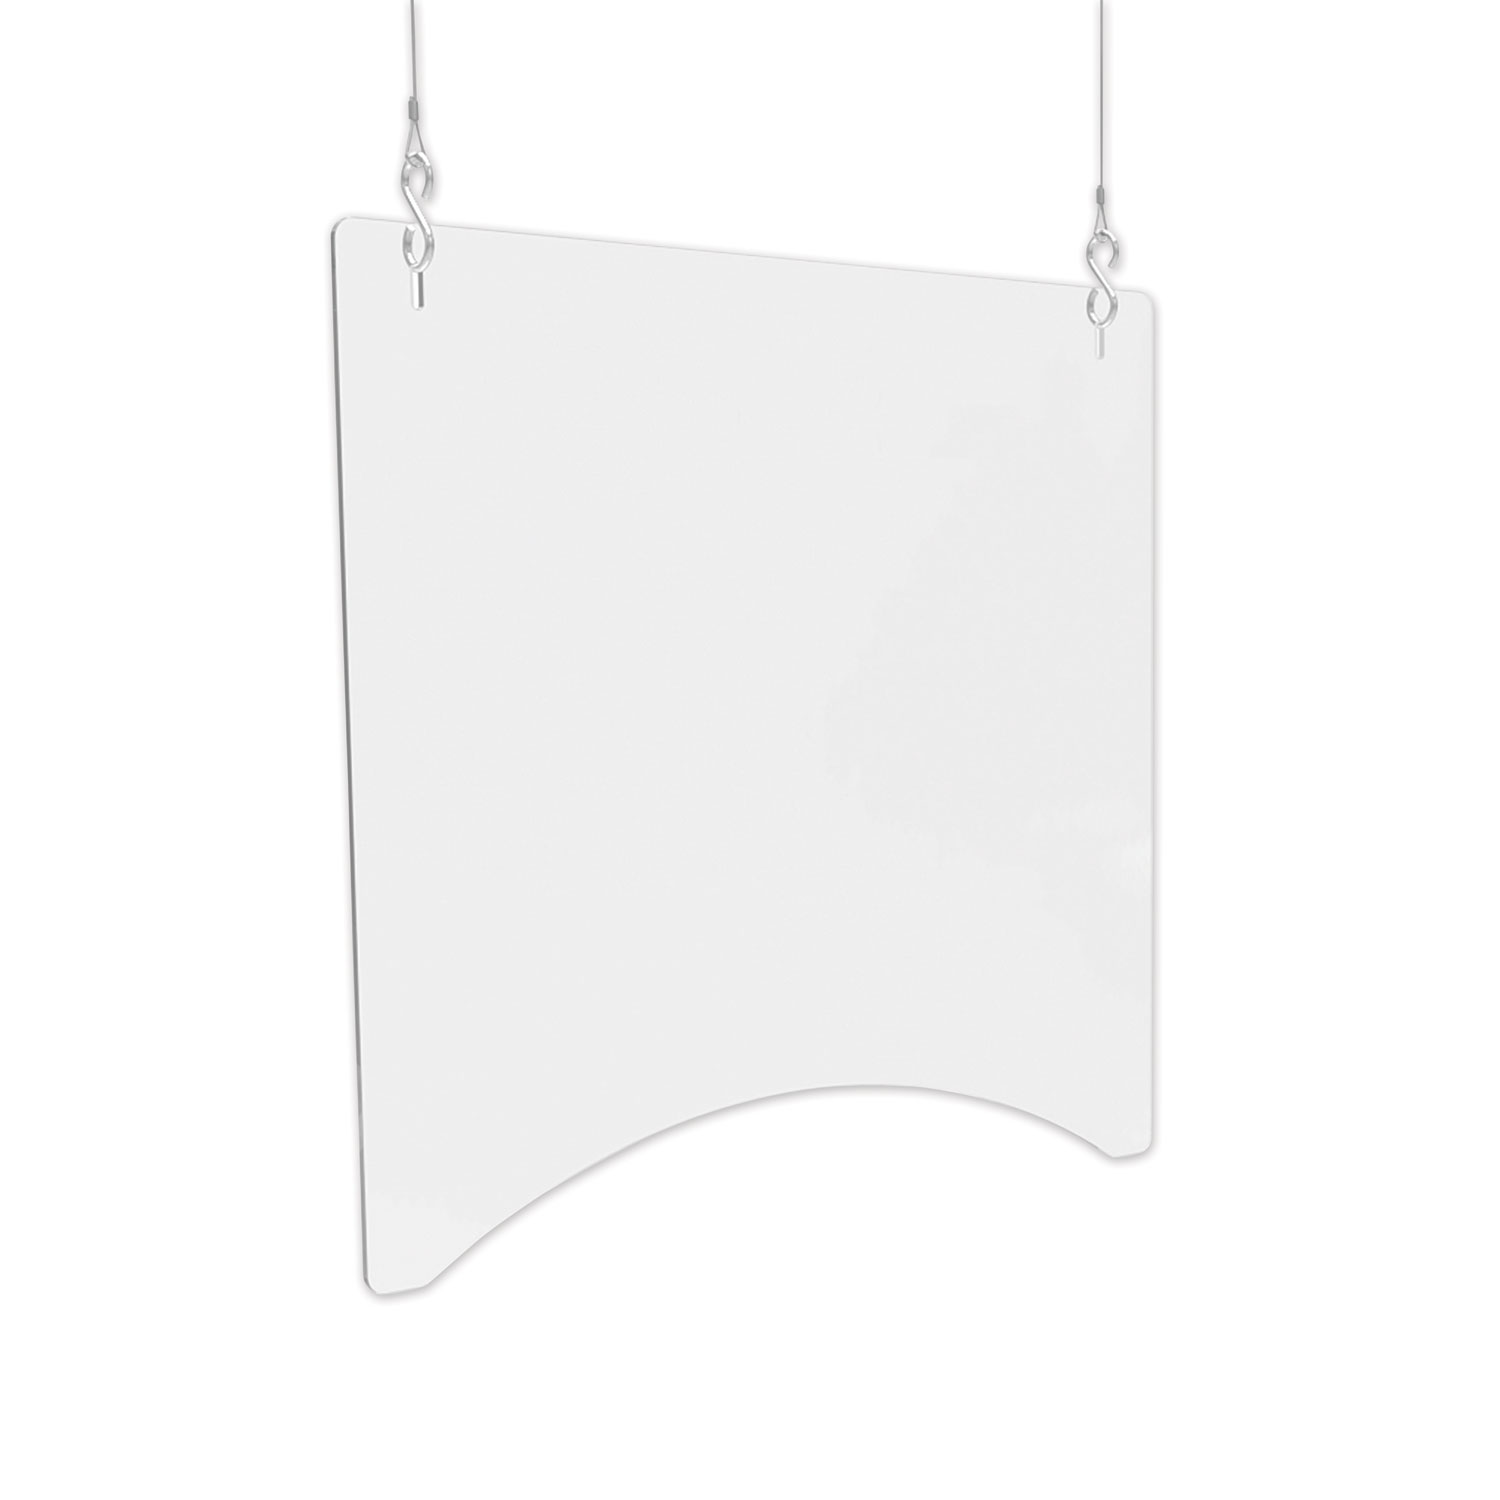  deflecto PBCHPC2436 Hanging Barrier, 23.75 x 35.75, Polycarbonate, Clear, 2/Carton (DEFPBCHPC2436) 